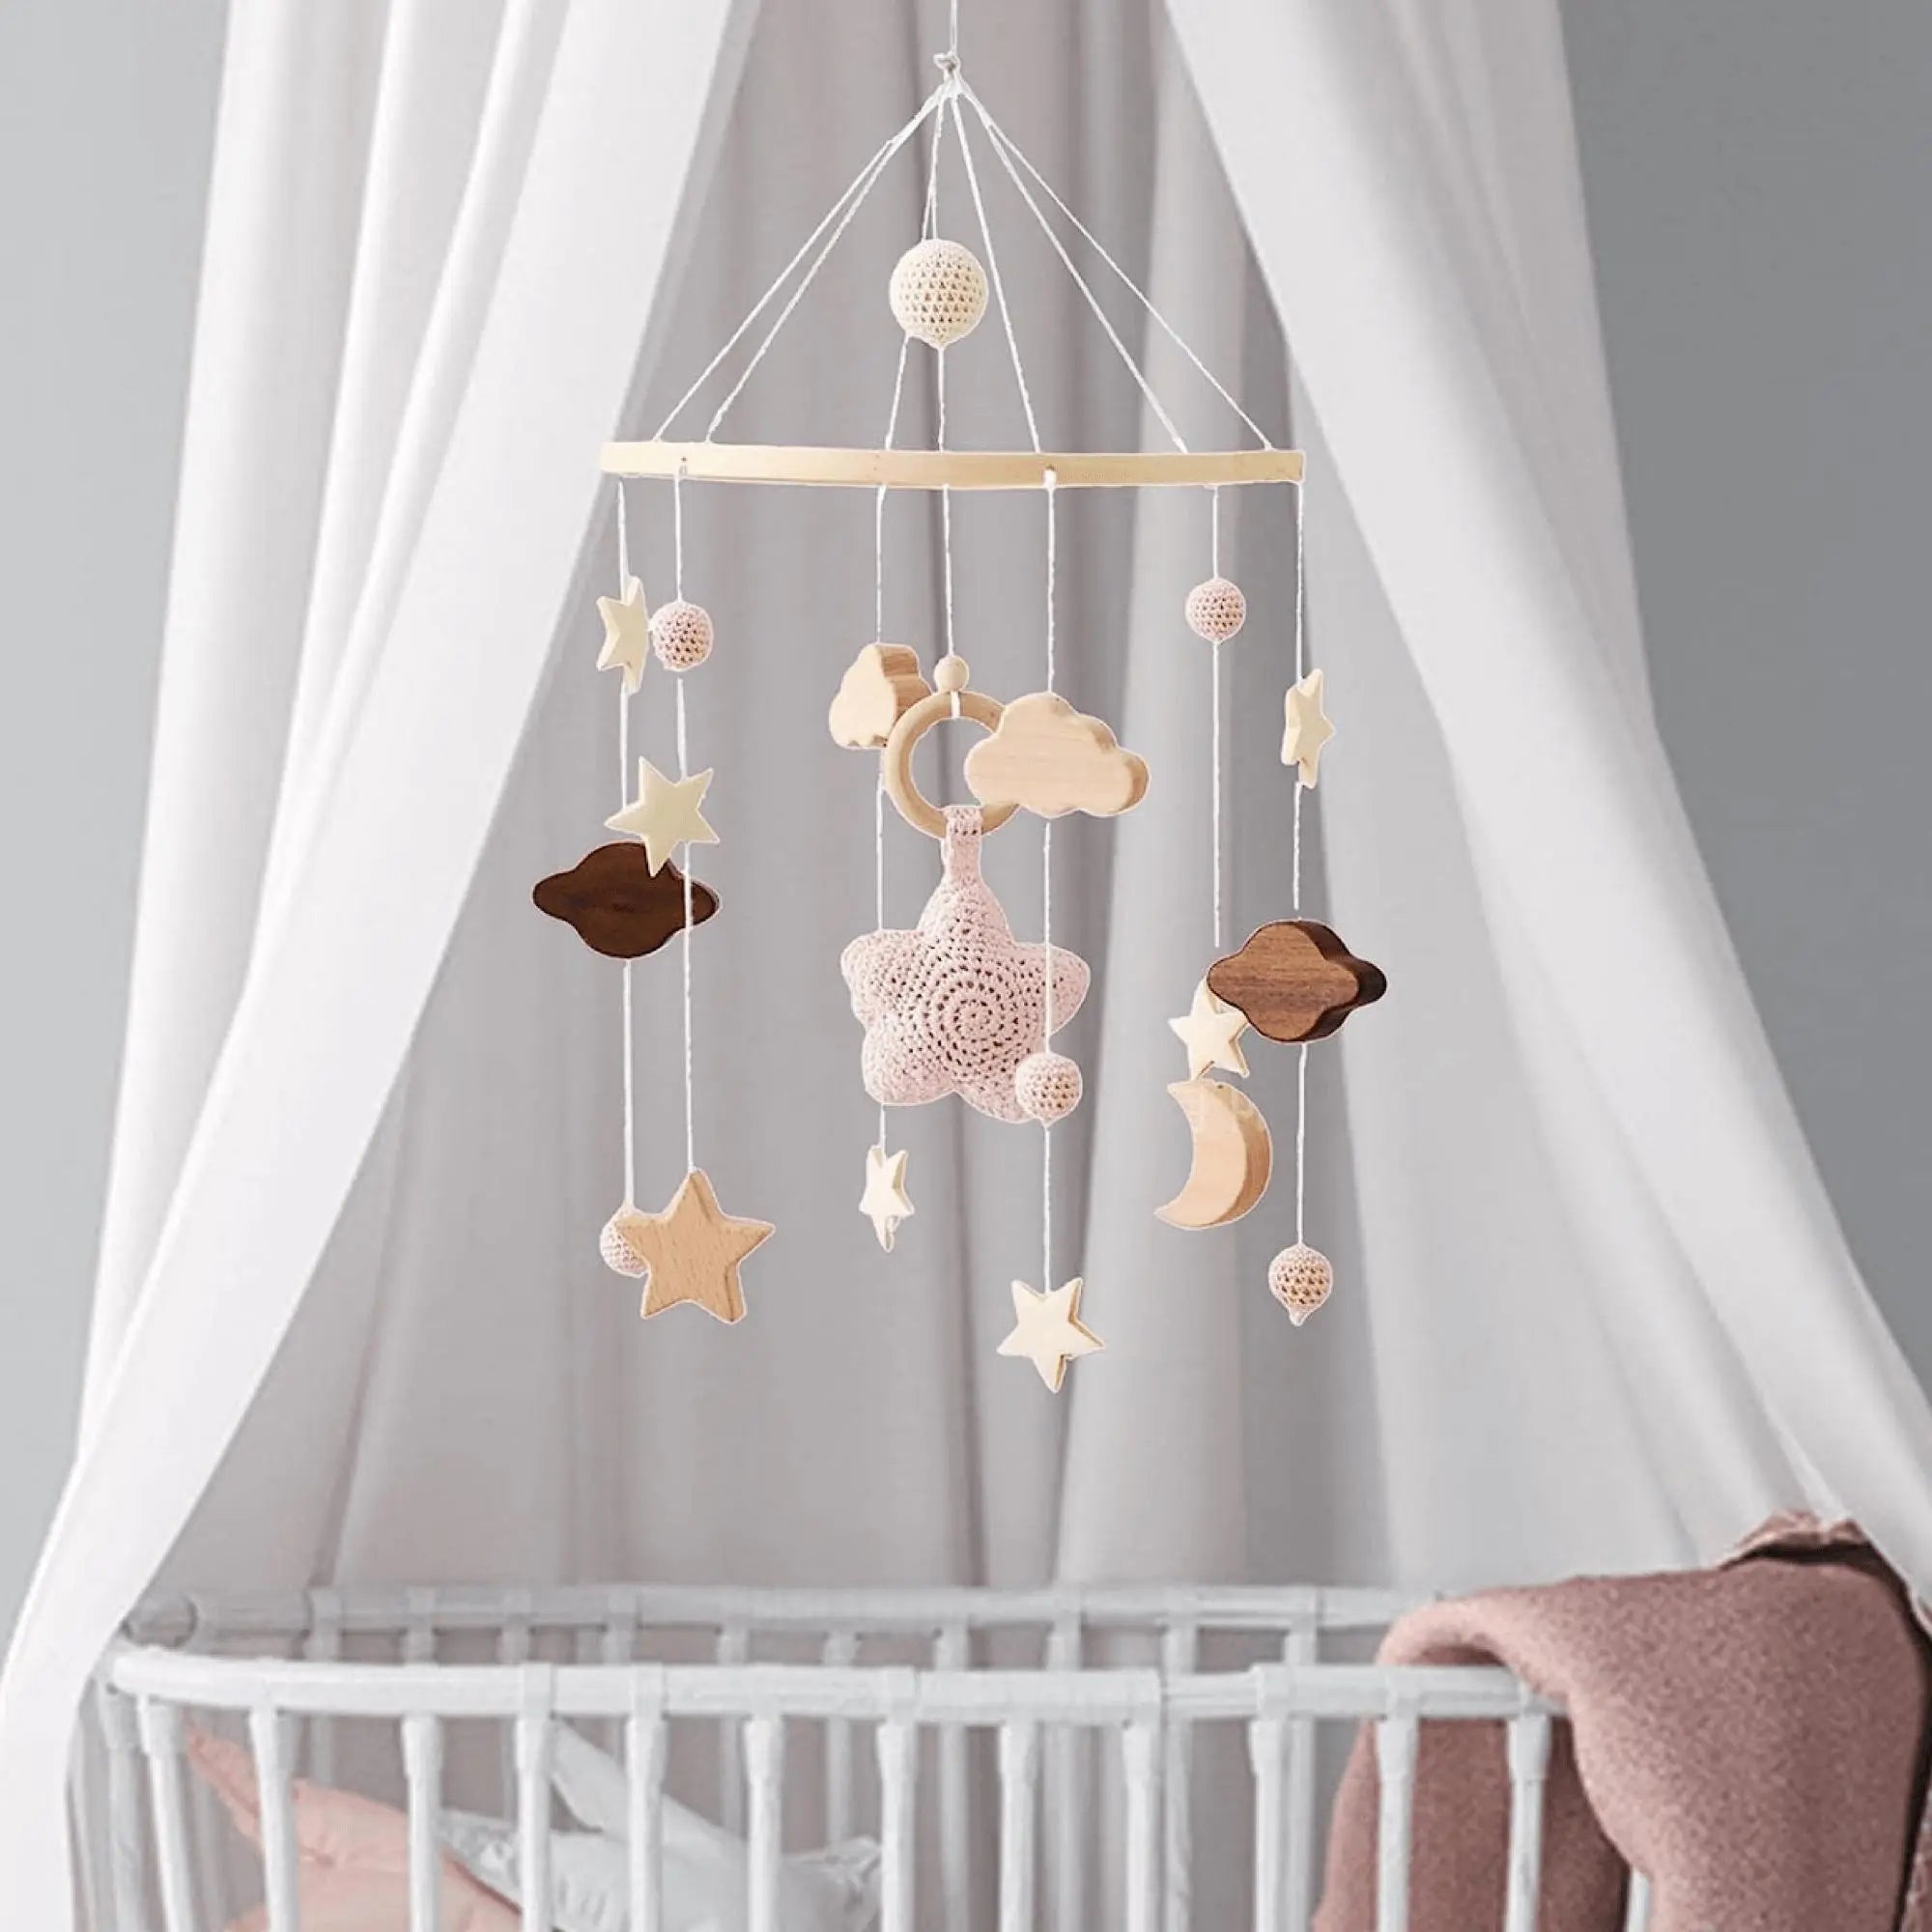 Clouds and Stars Wooden Round Ring Hanging Crib Mobile, color pink